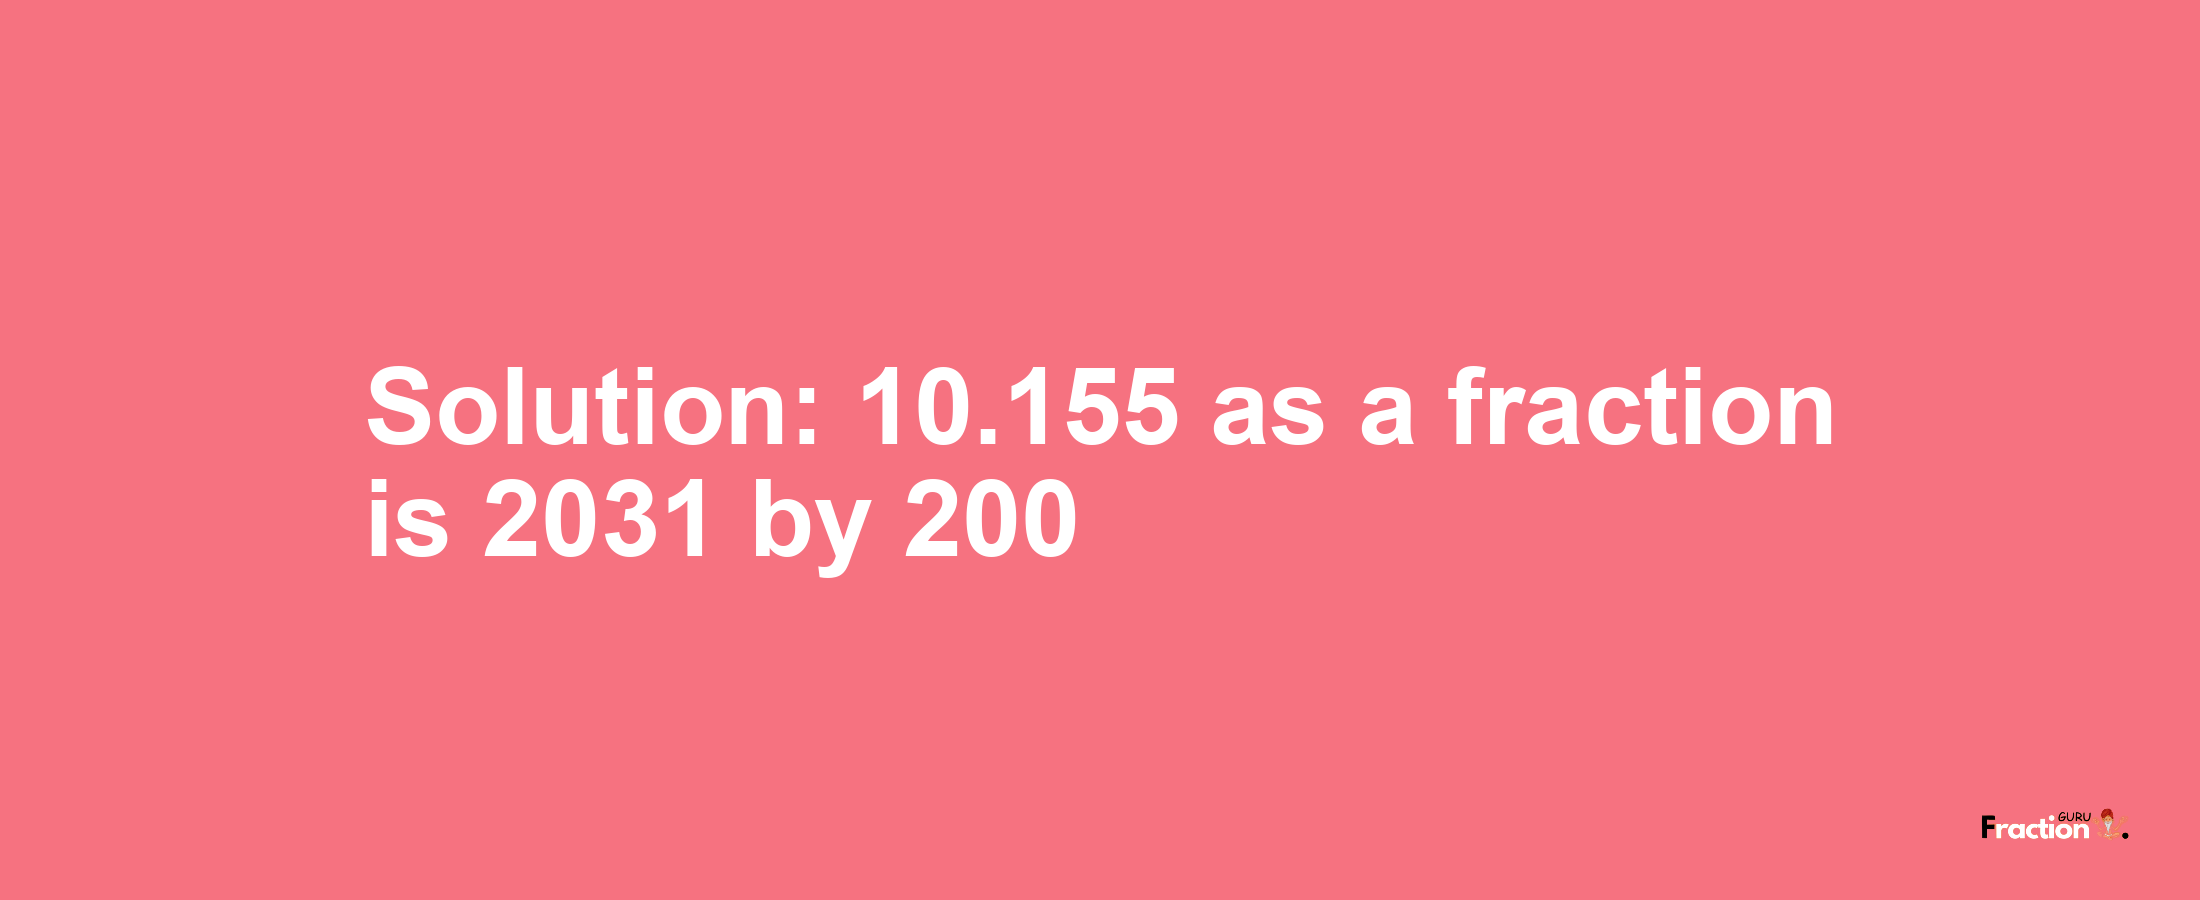 Solution:10.155 as a fraction is 2031/200